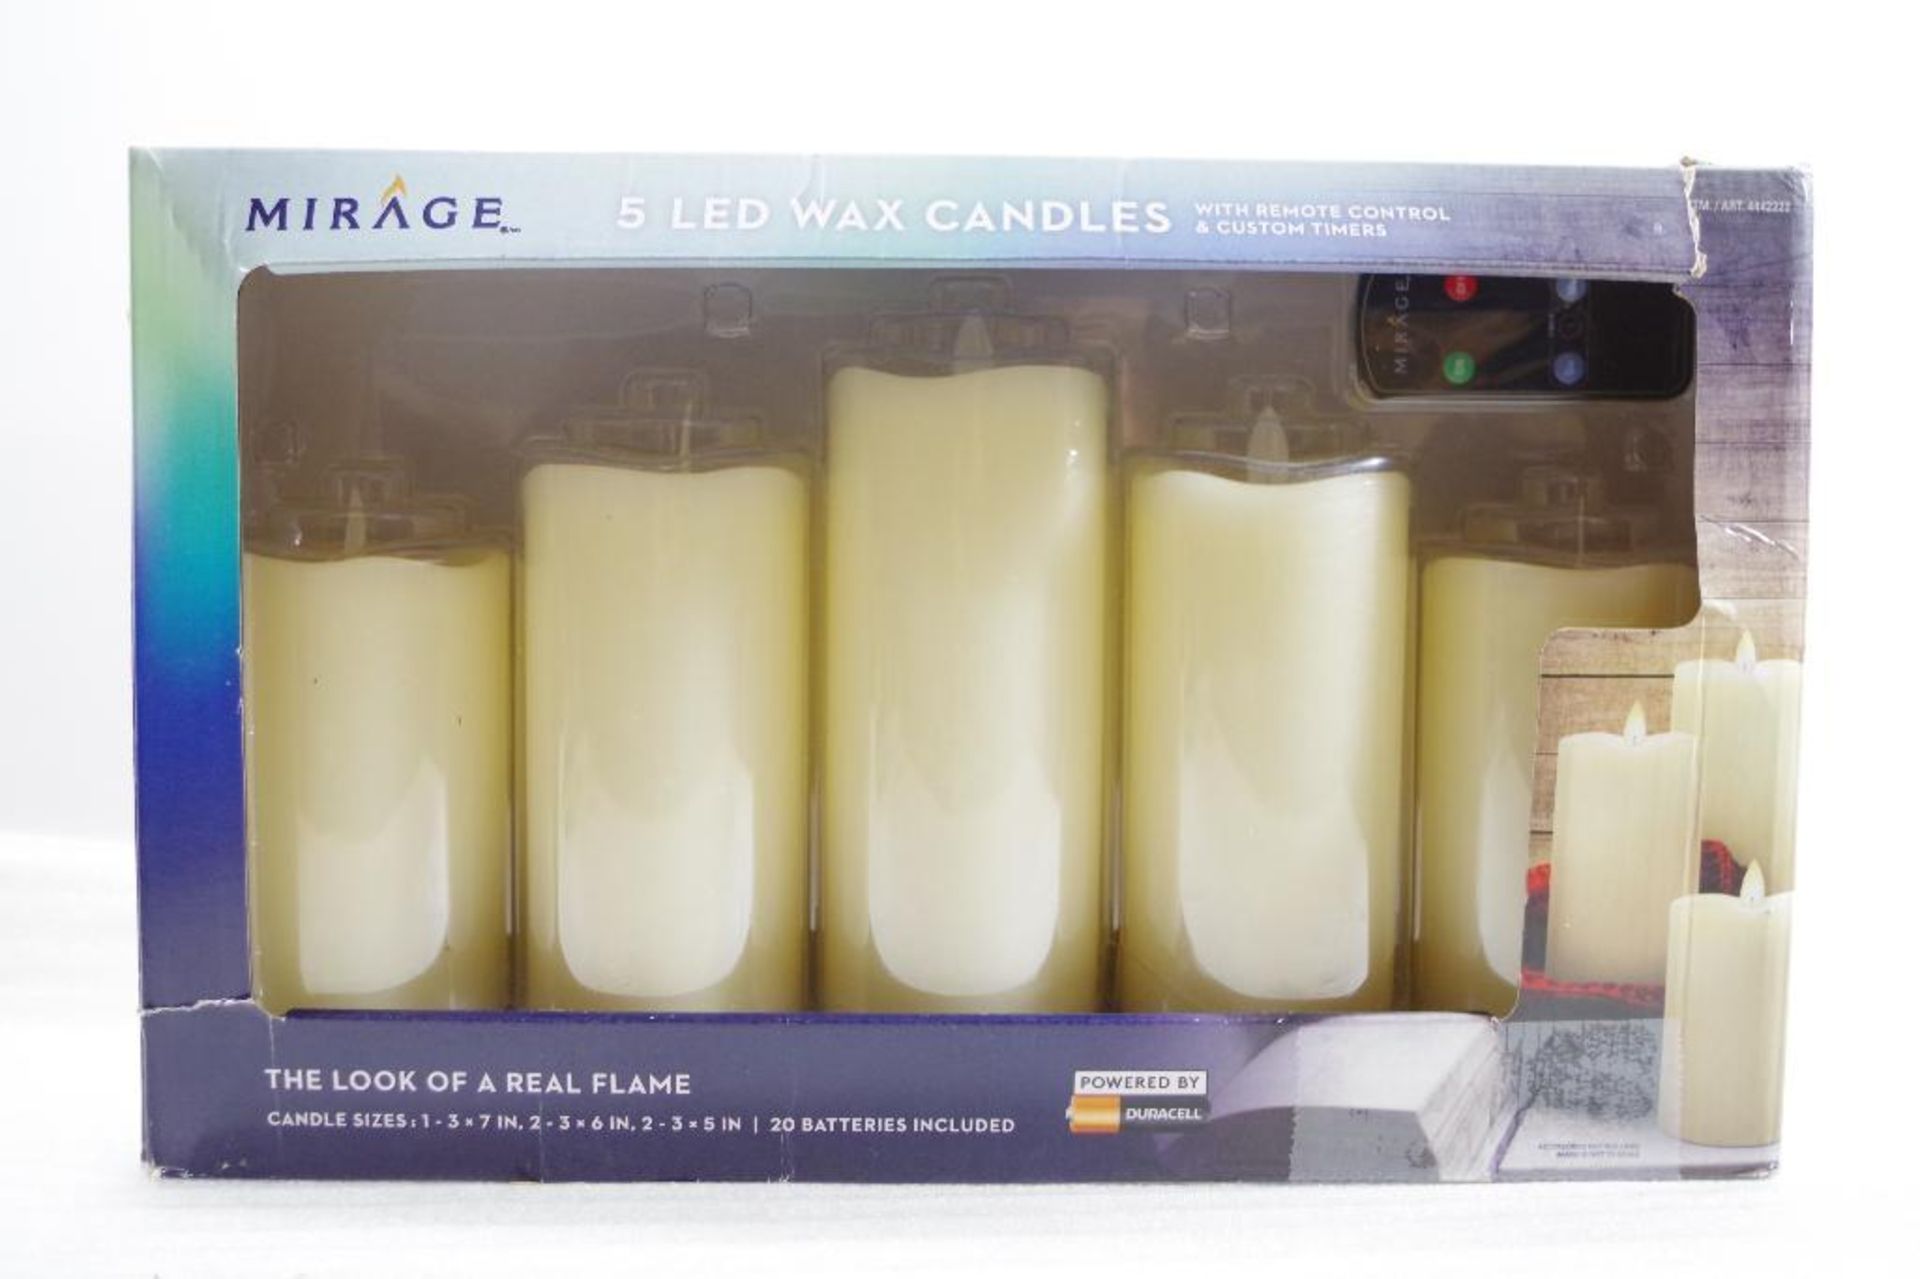 MIRAGE 5-LED Wax Candles w/ Remote Control & Custom Timers - Image 3 of 3